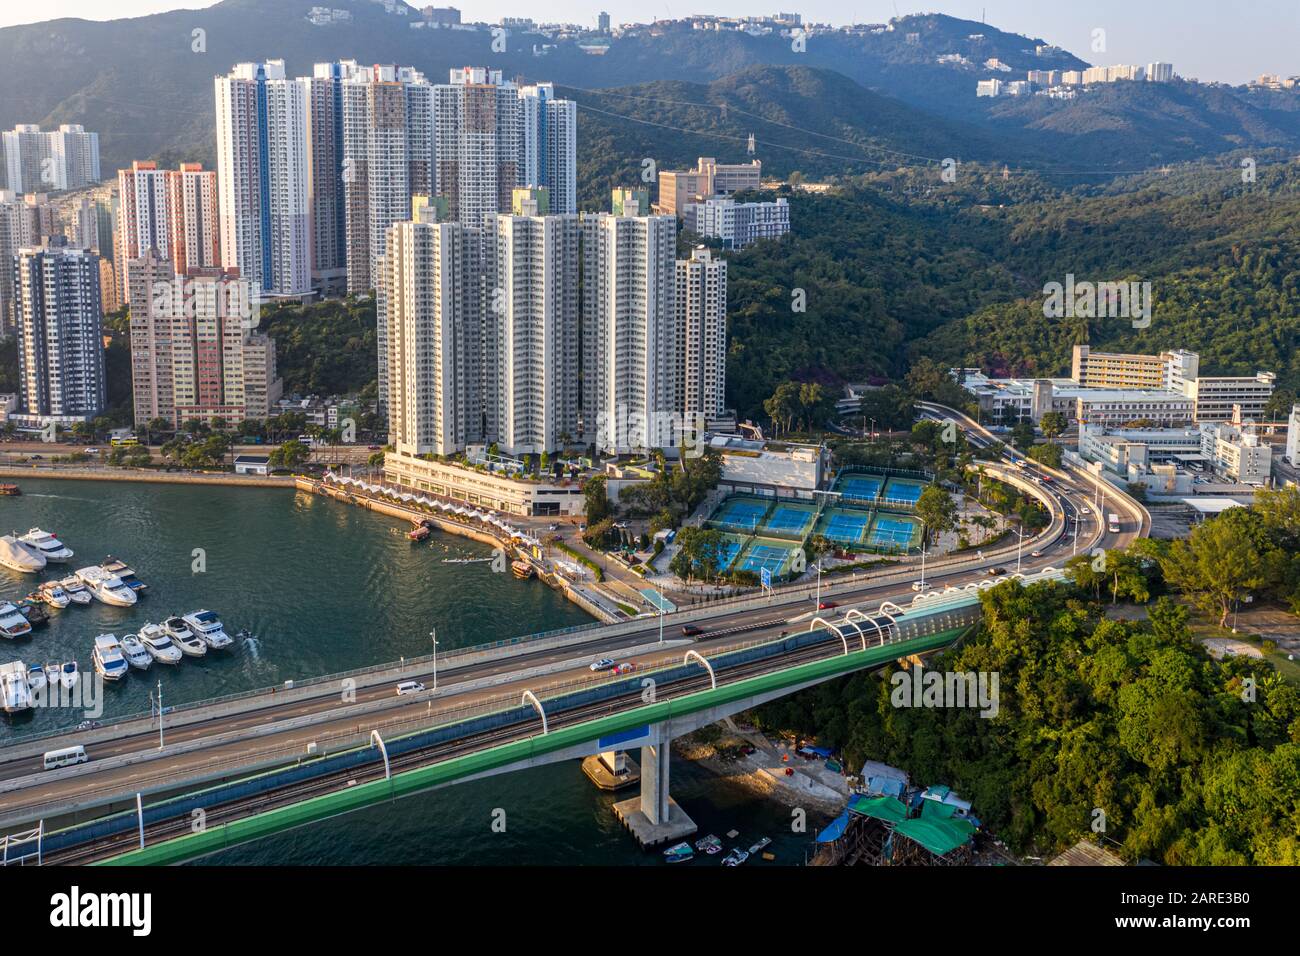 Aerial view of Aberdeen Typhoon Shelters and Ap Lei Chau, Hong Kong Stock Photo